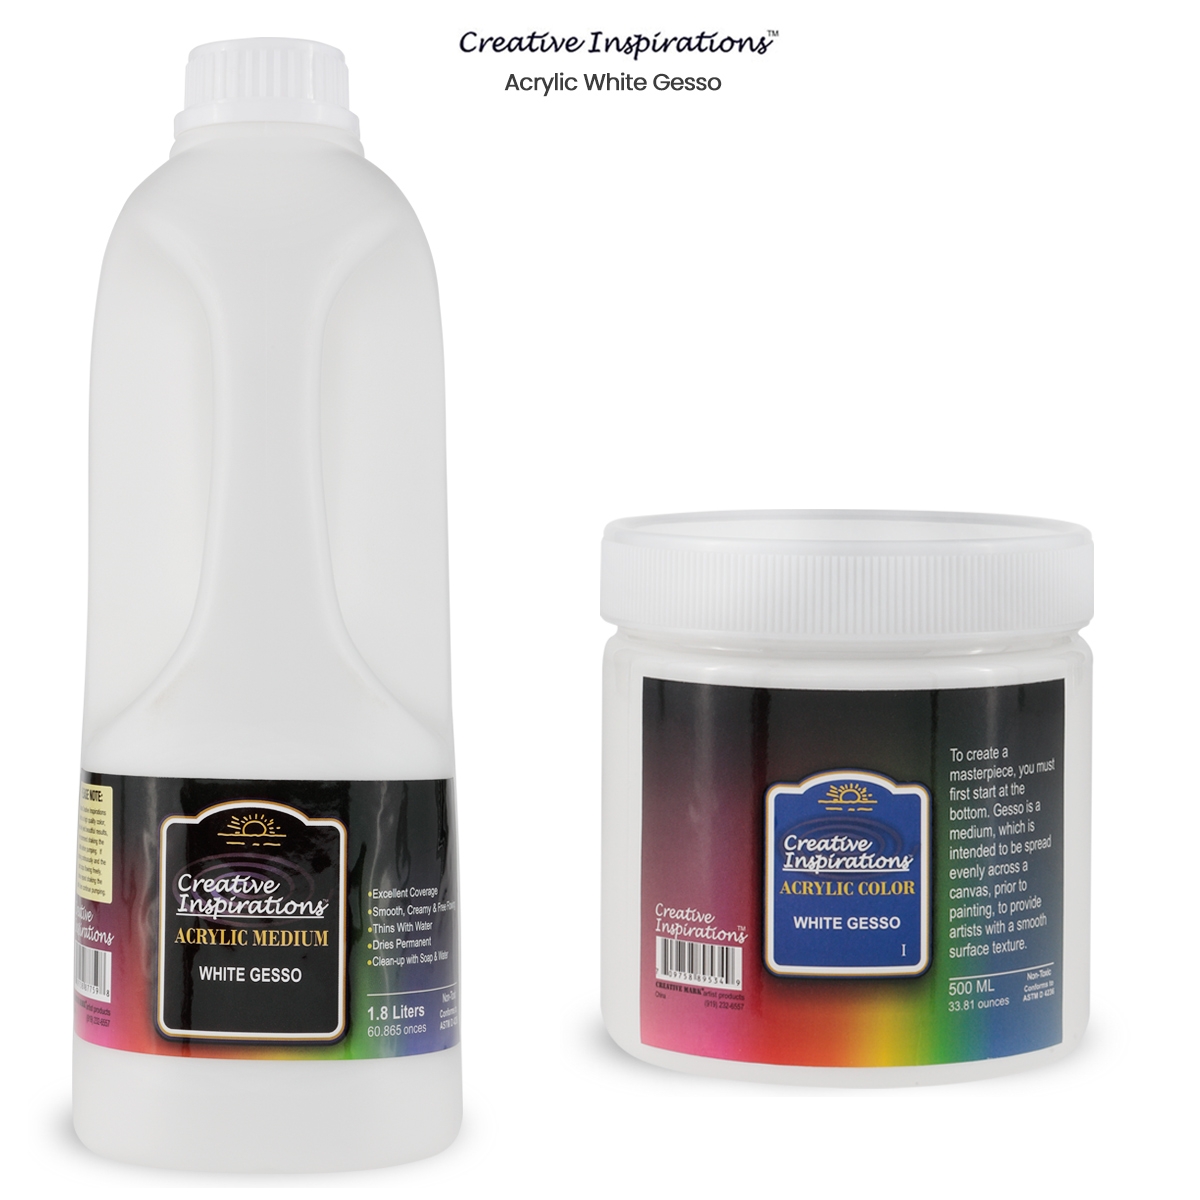 Creative Inspirations Acrylic White Gesso